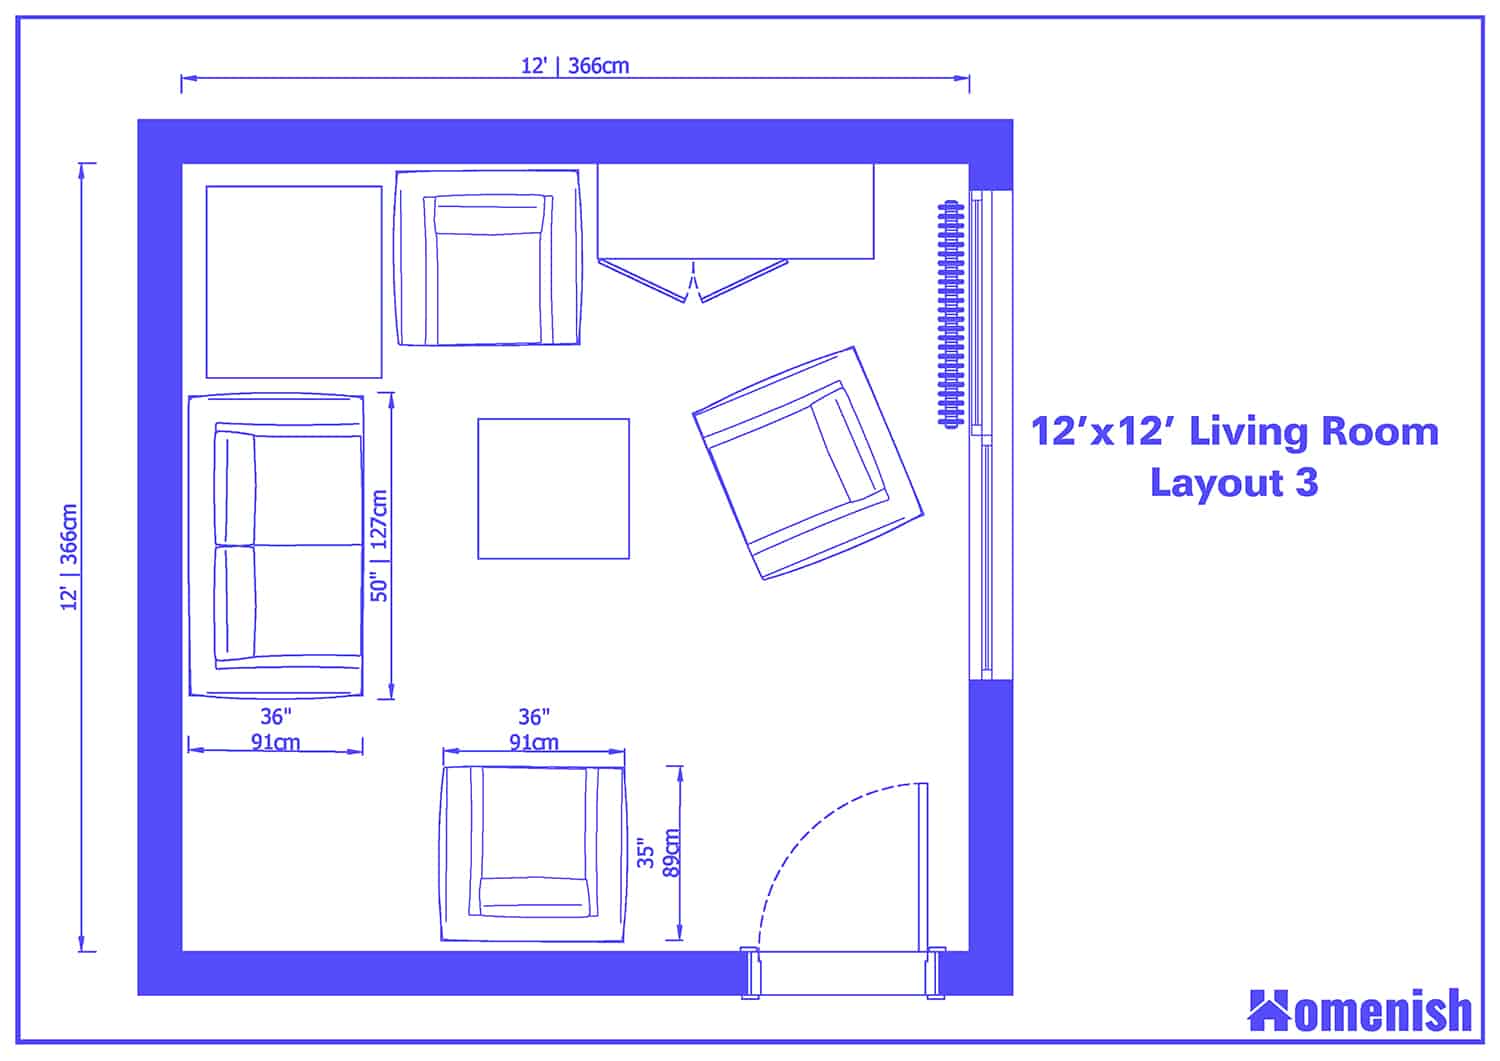 15 X 12 Living Room Layout